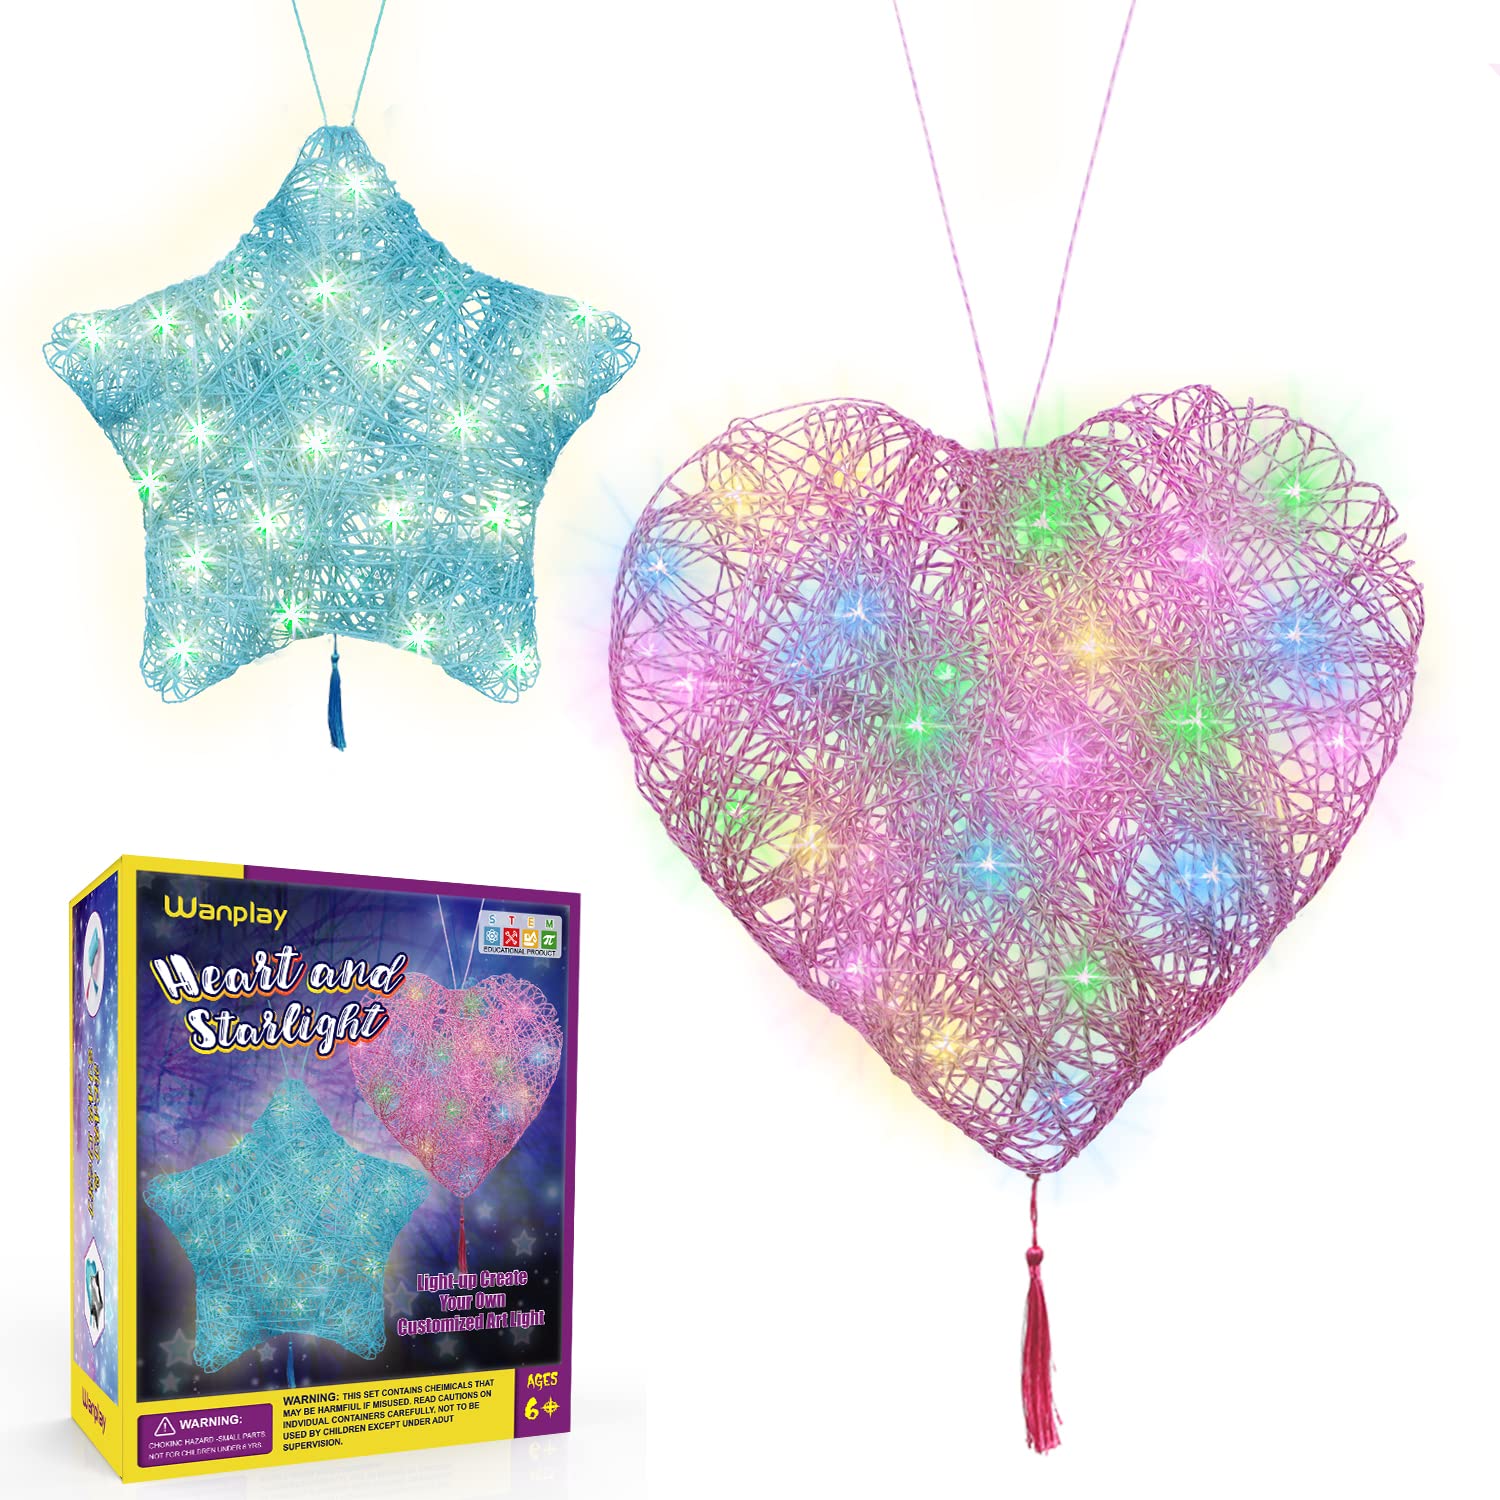 Wanplay crafts Art Kit for Kids,3D String Art Kit with glowing Heart and  Star Lantern